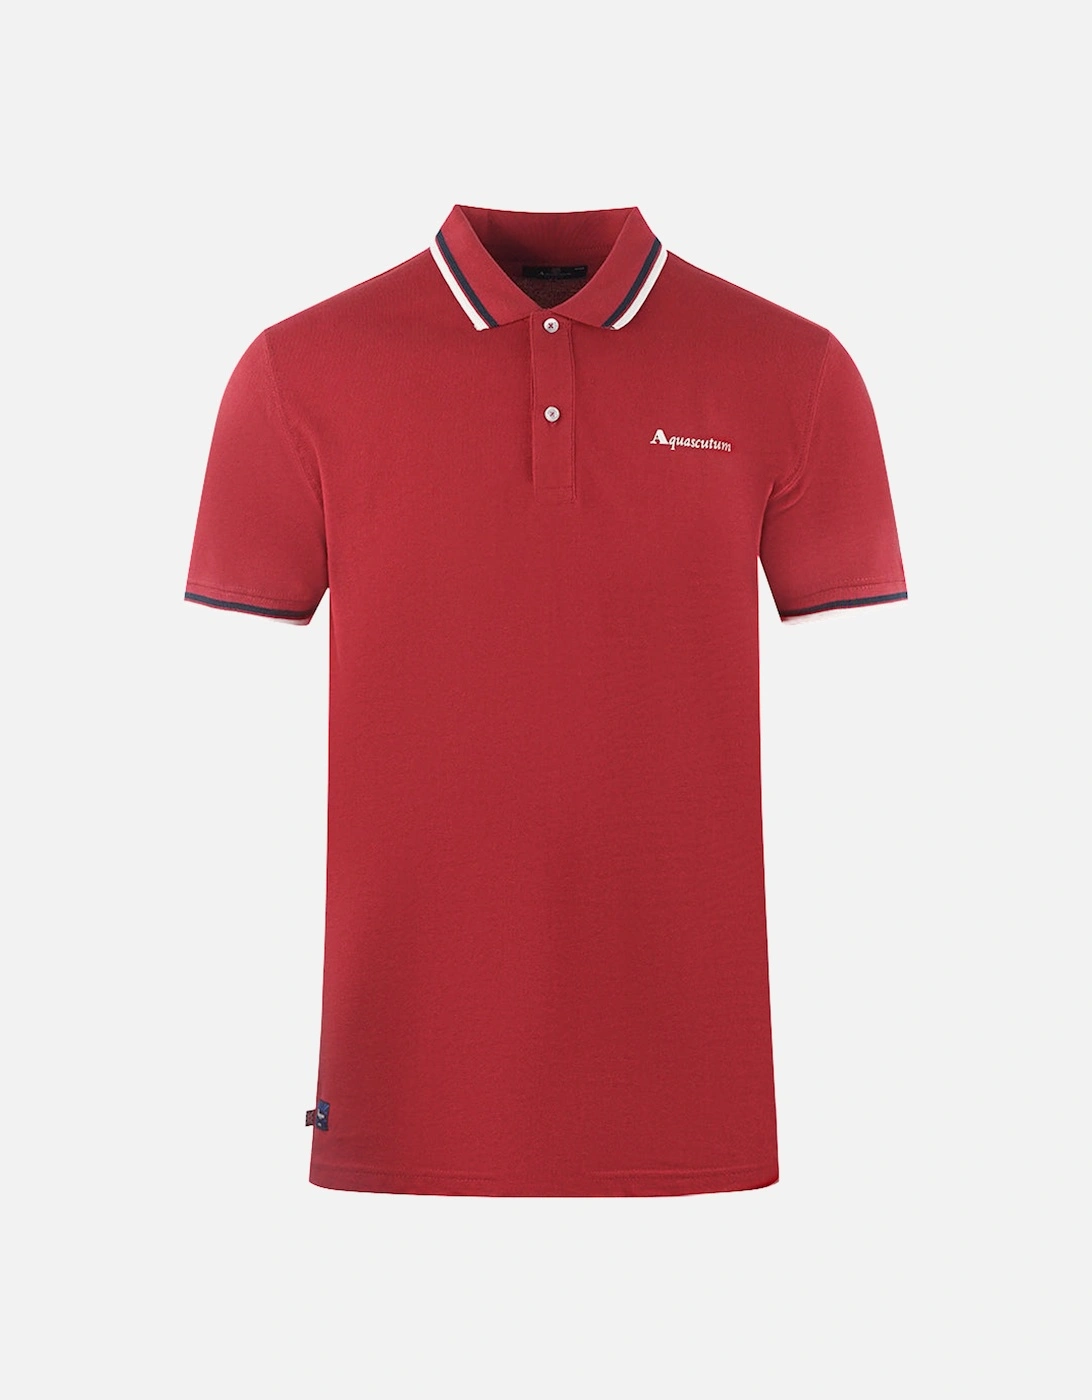 Twin Tipped Collar Brand Logo Bordeaux Red Polo Shirt, 3 of 2